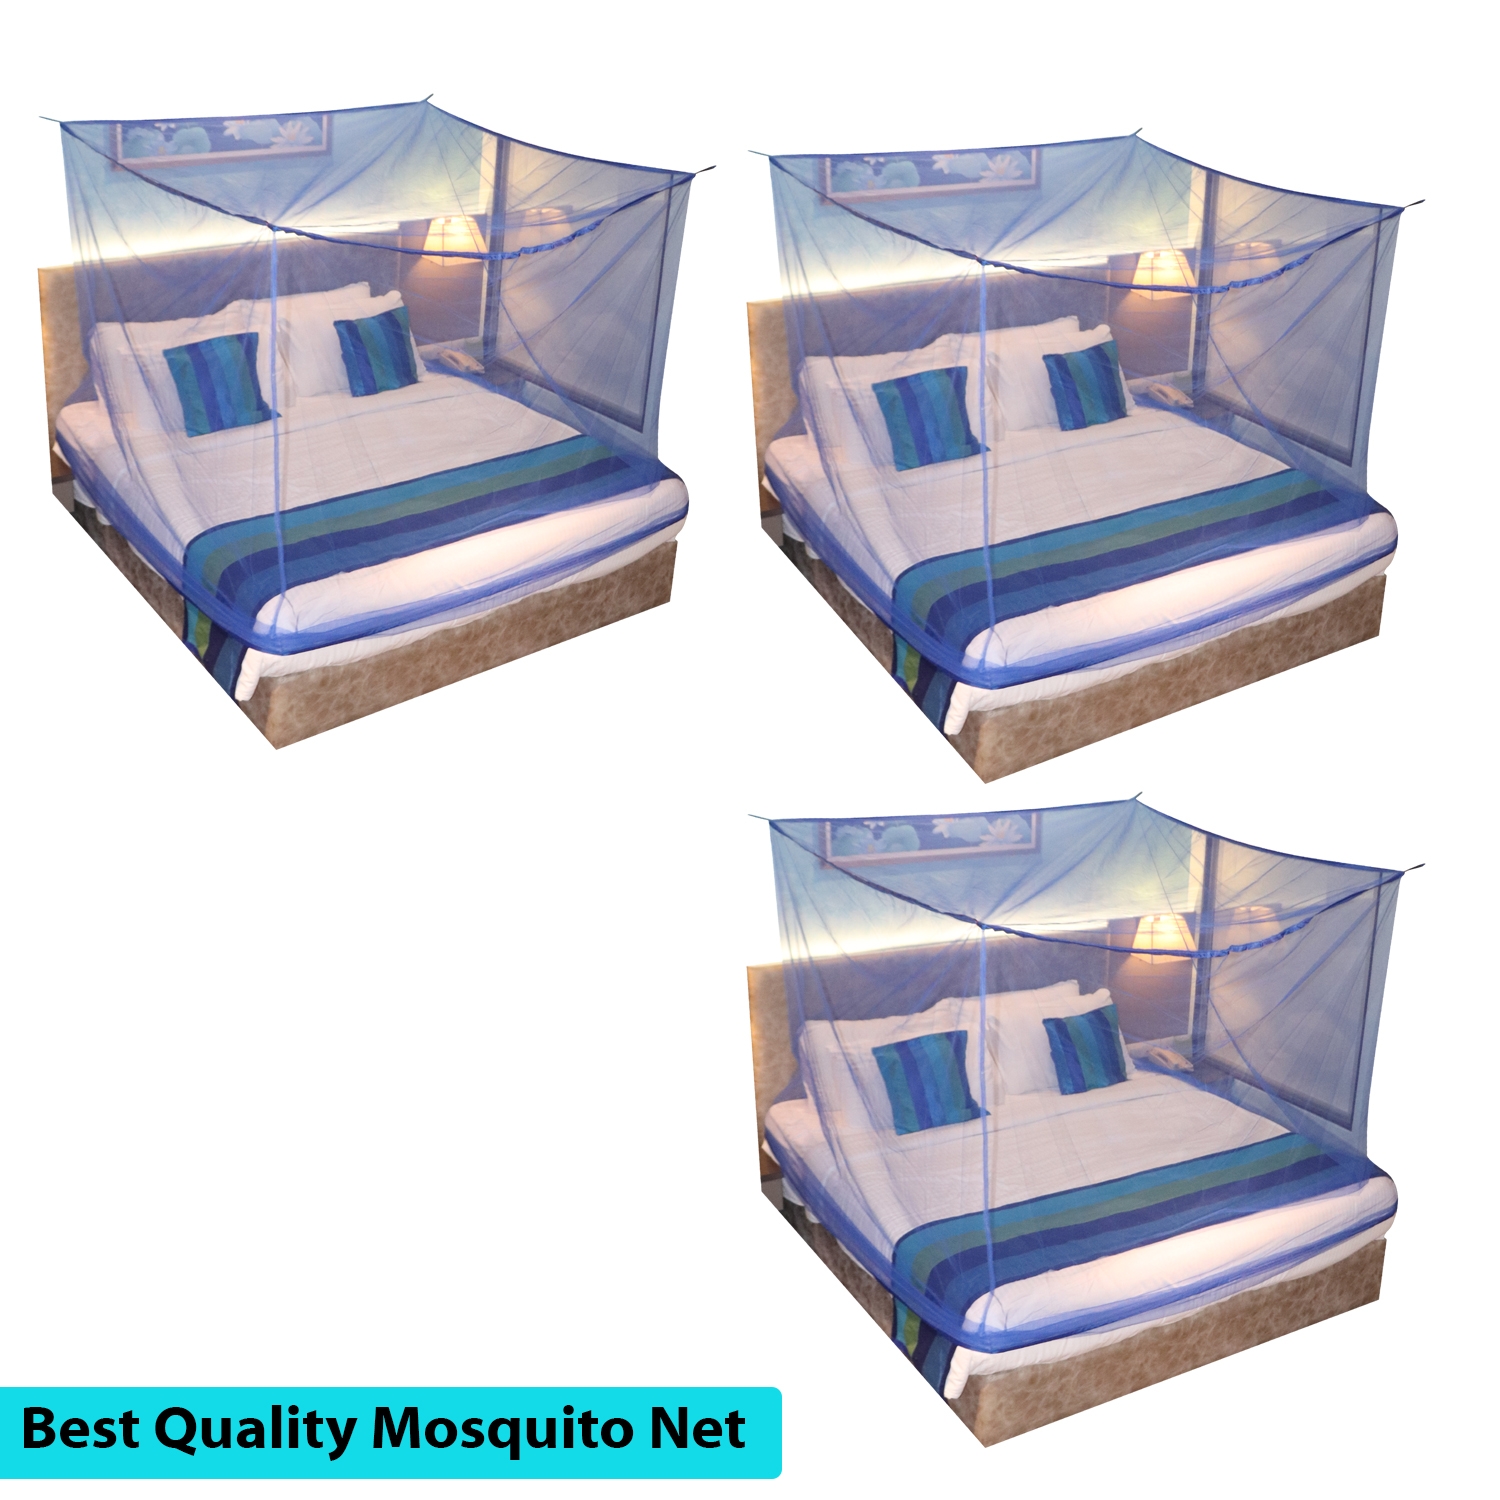 Paola Jewels | Mosquito Net for Double Bed, King-Size, Square Hanging Foldable Polyester Net BluePack of 3 0